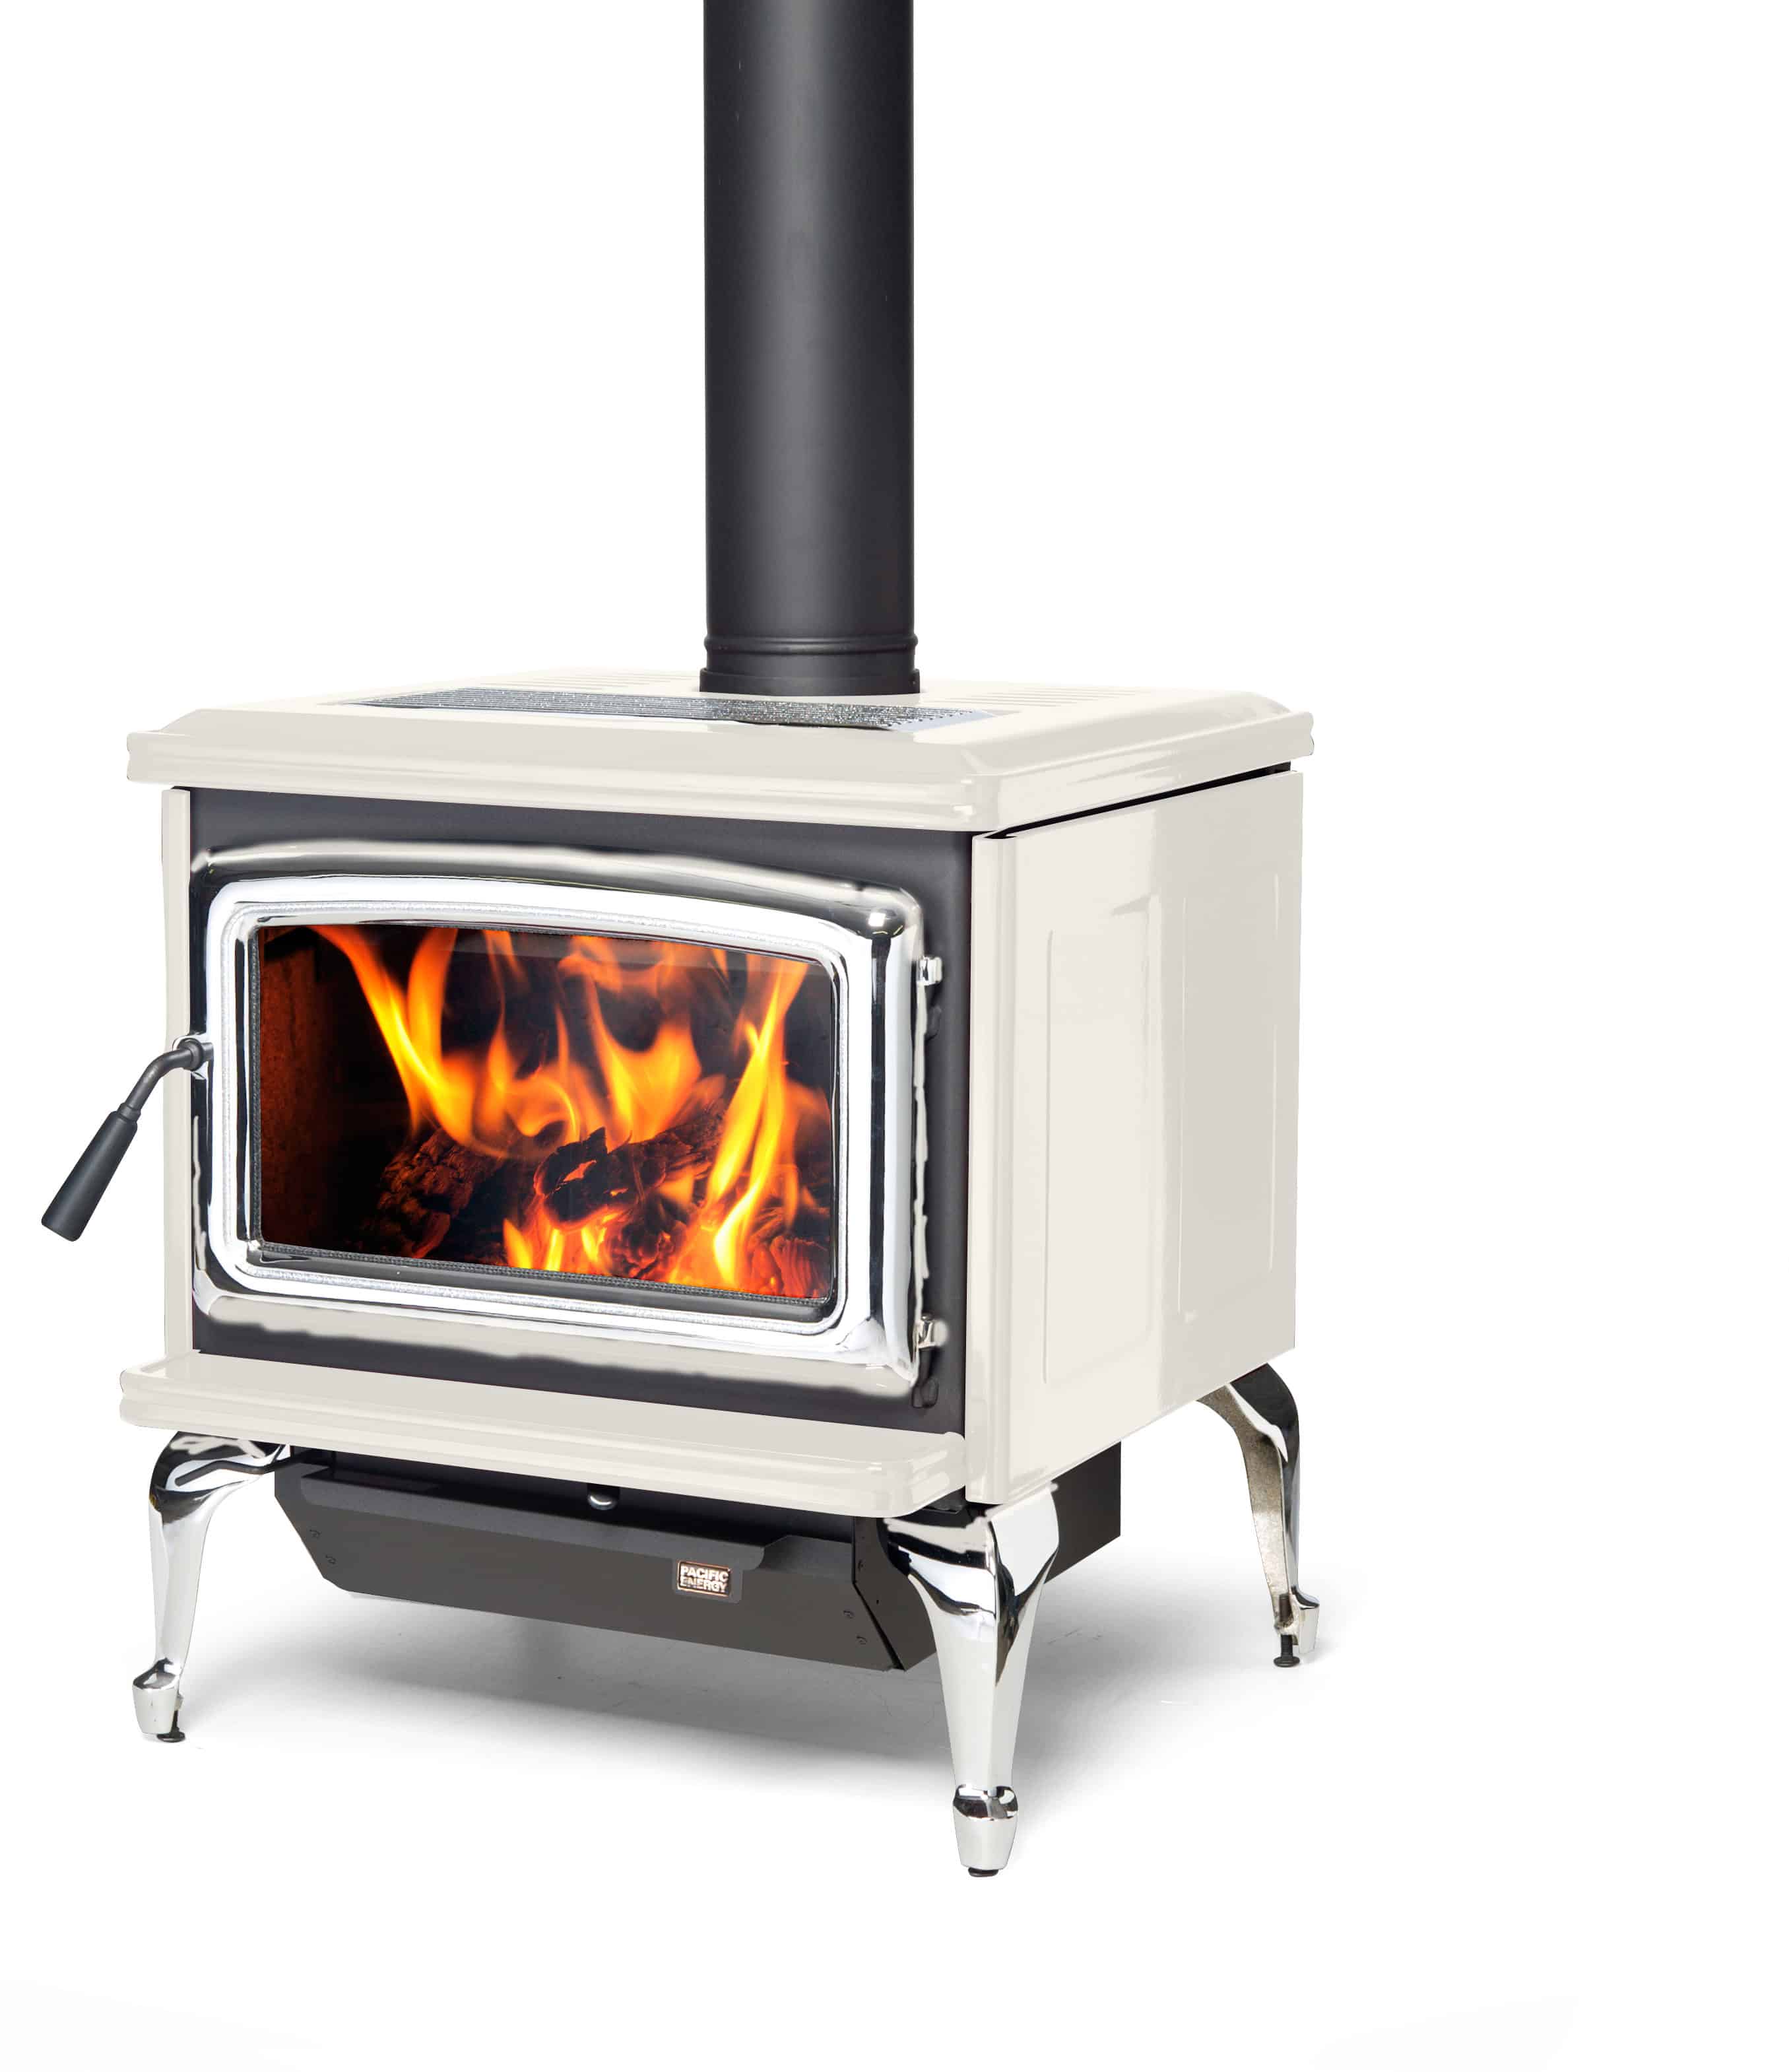 Pacific Energy Summit LE Wood Stove Safe Home Fireplace